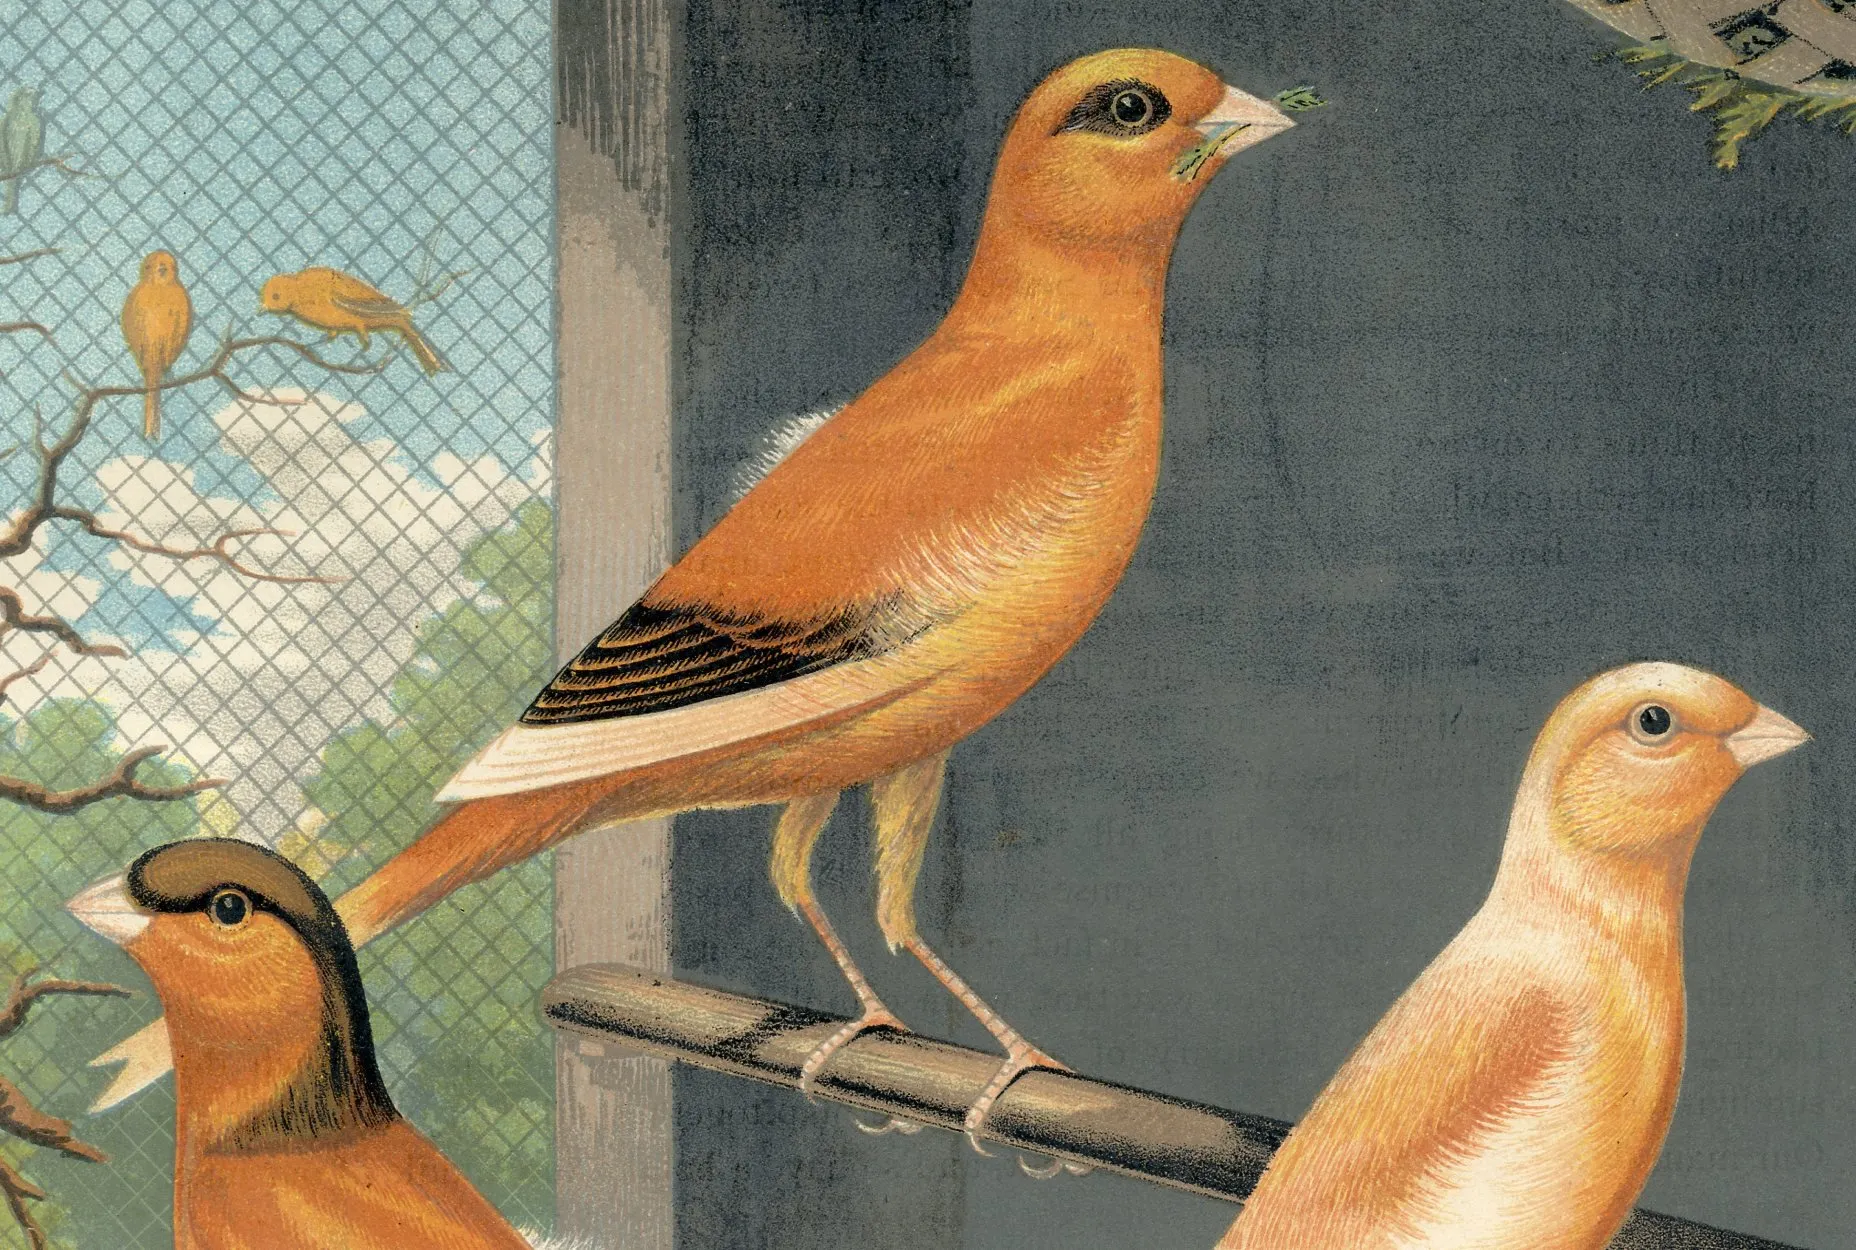 19th-C. Canary Prints - Set of 2 - Prints with a Past - Yellow